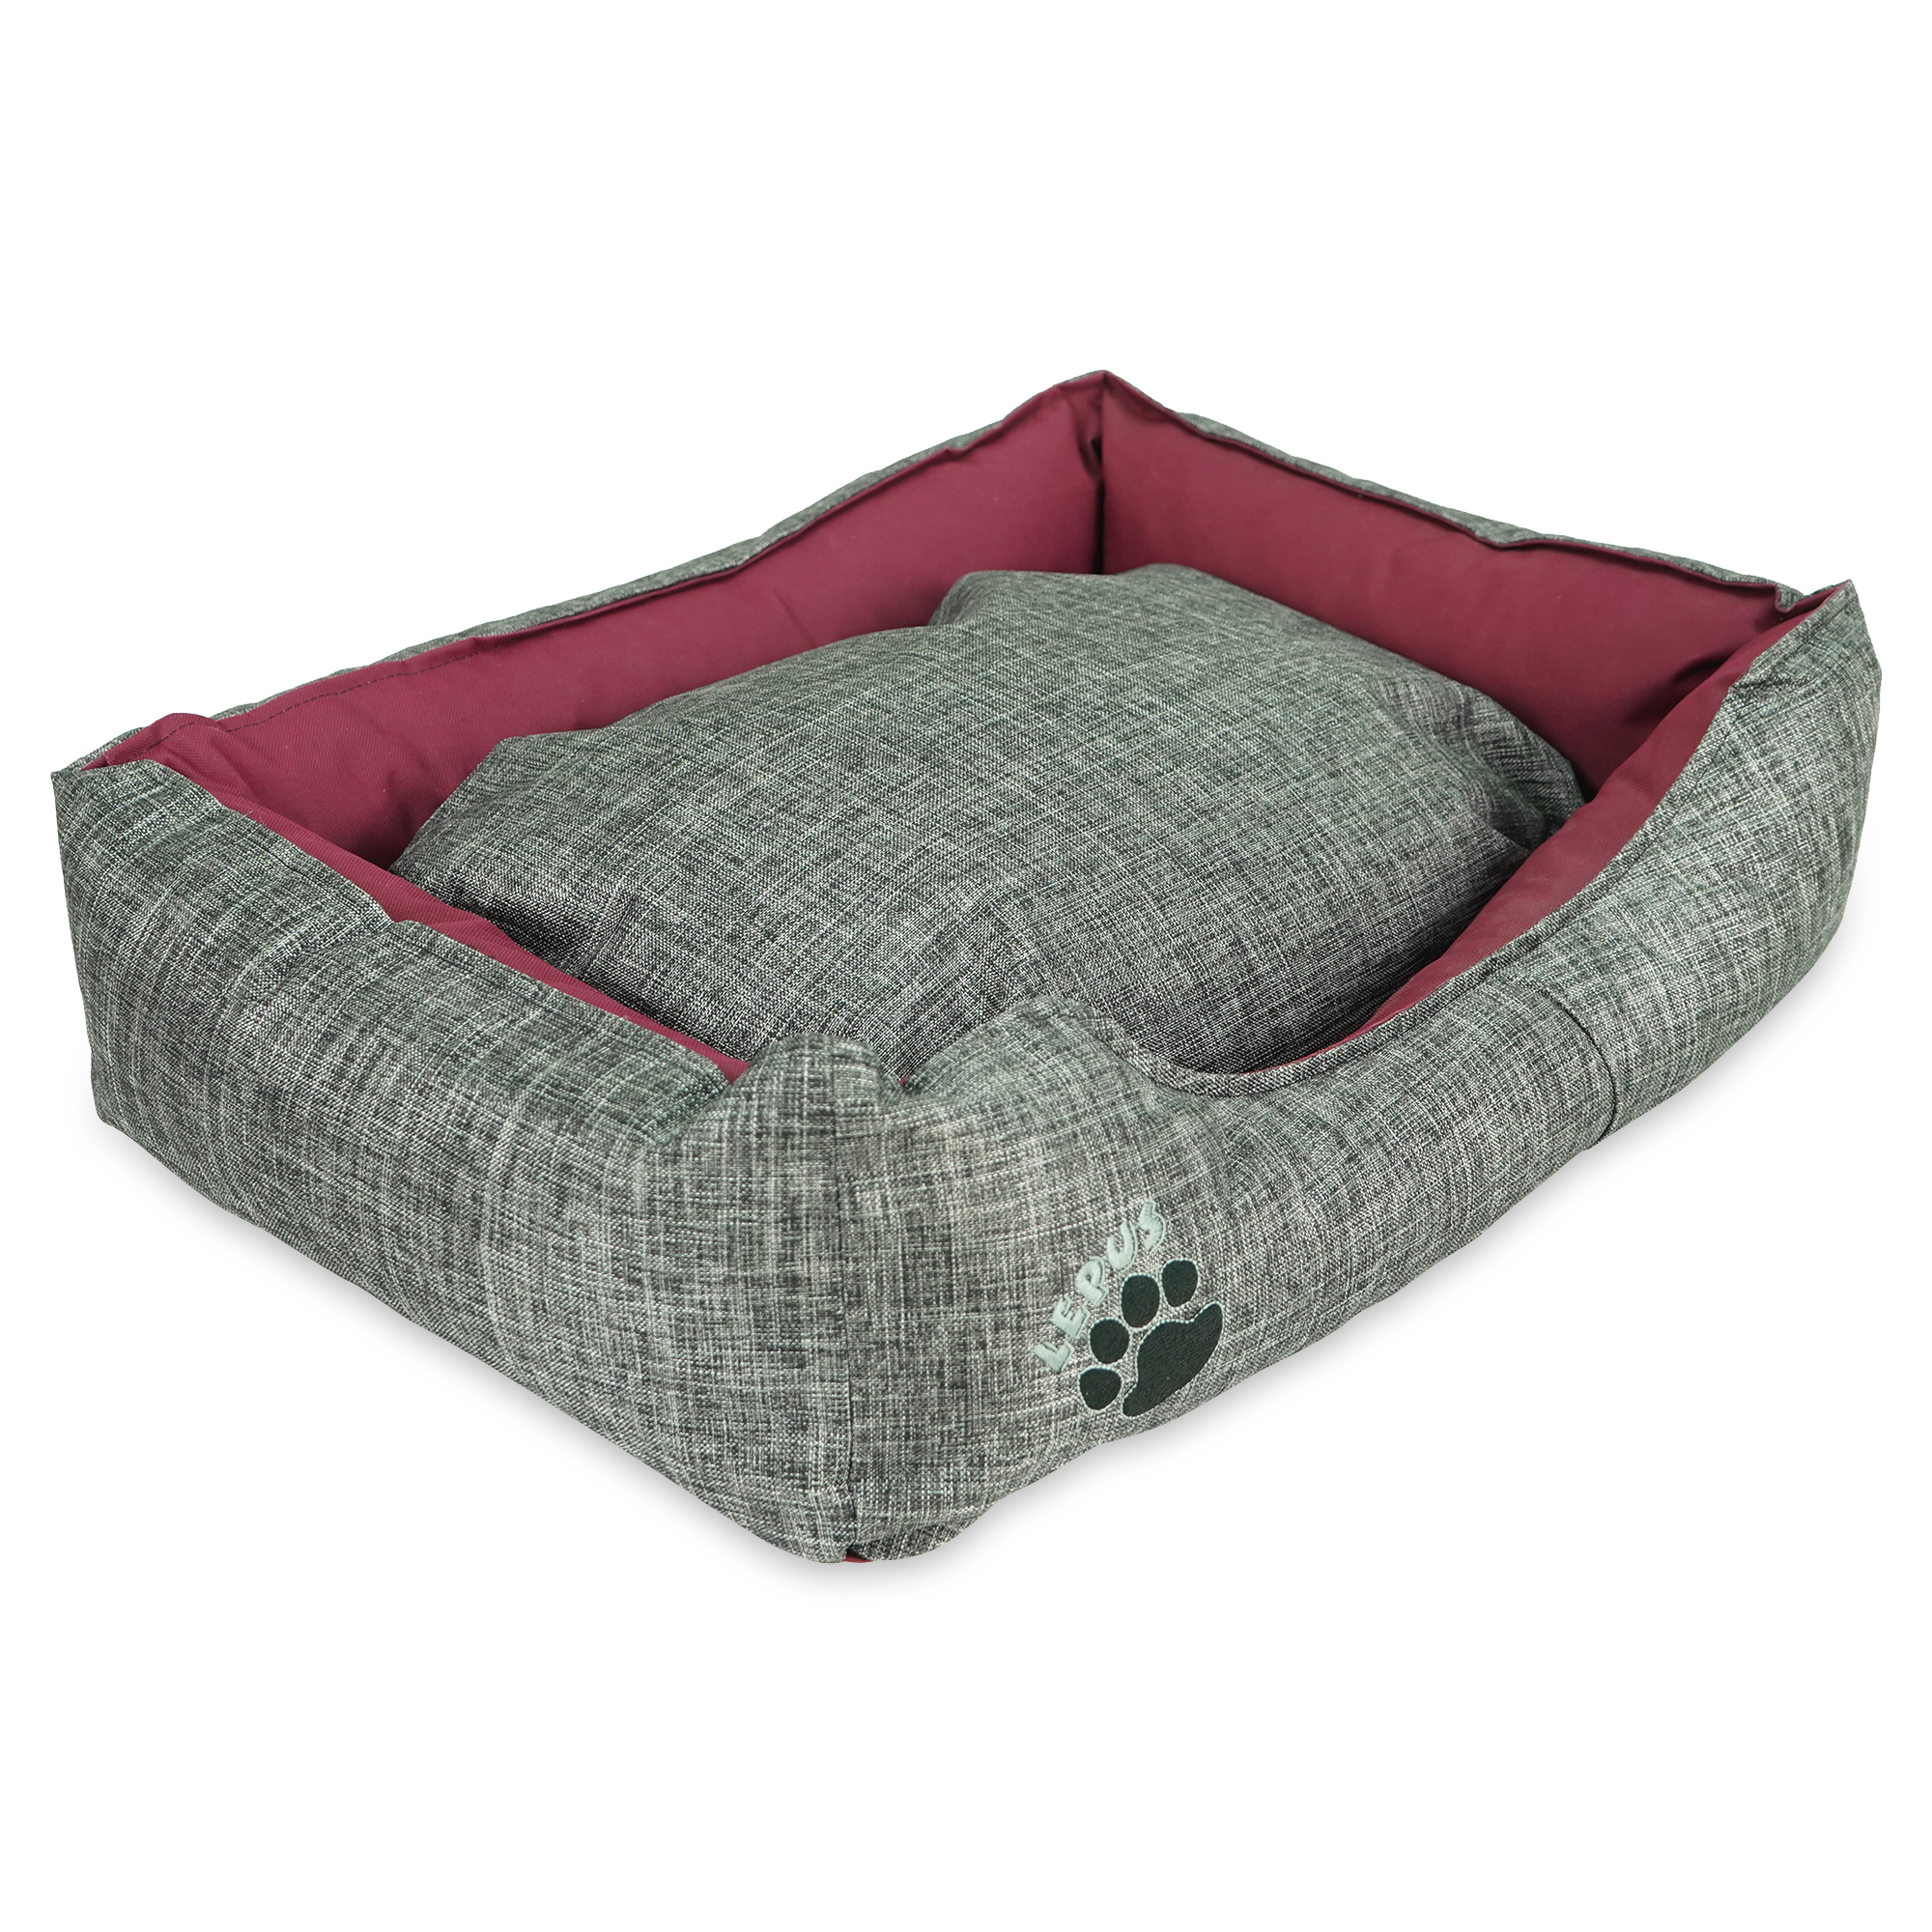 SUSSEXHOME Pets 23.5 x 17.3 x 7 Inches Outdoor Dog Bed for Medium Dogs - Durable Waterproof Sofa Dog Bed with Sides - (GRAY) - image 1 of 6